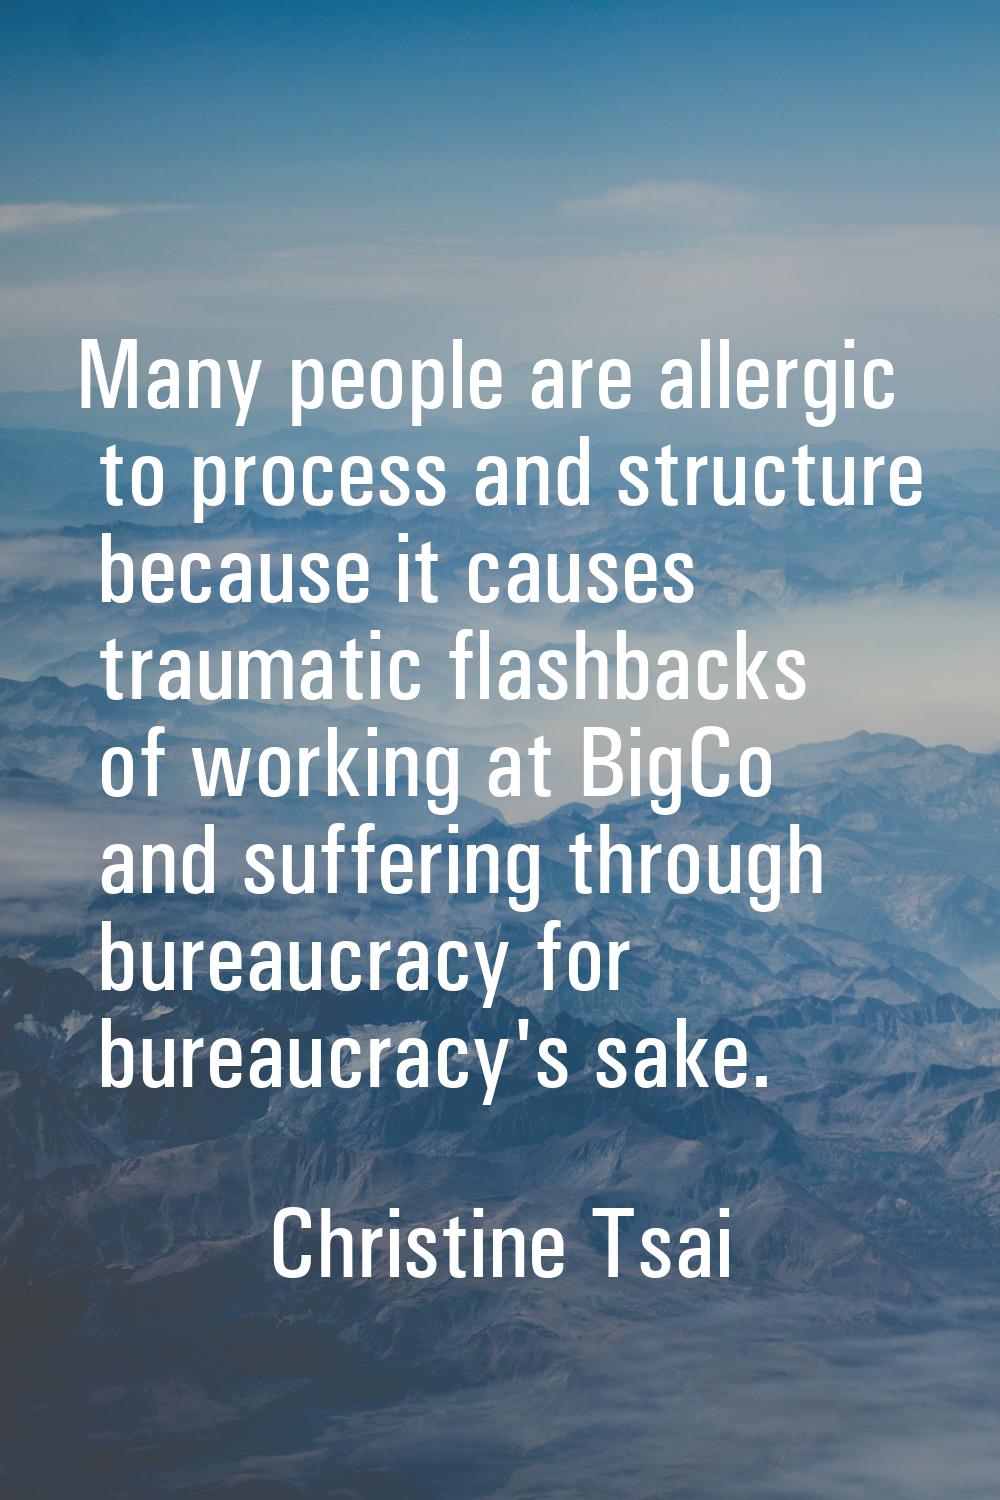 Many people are allergic to process and structure because it causes traumatic flashbacks of working